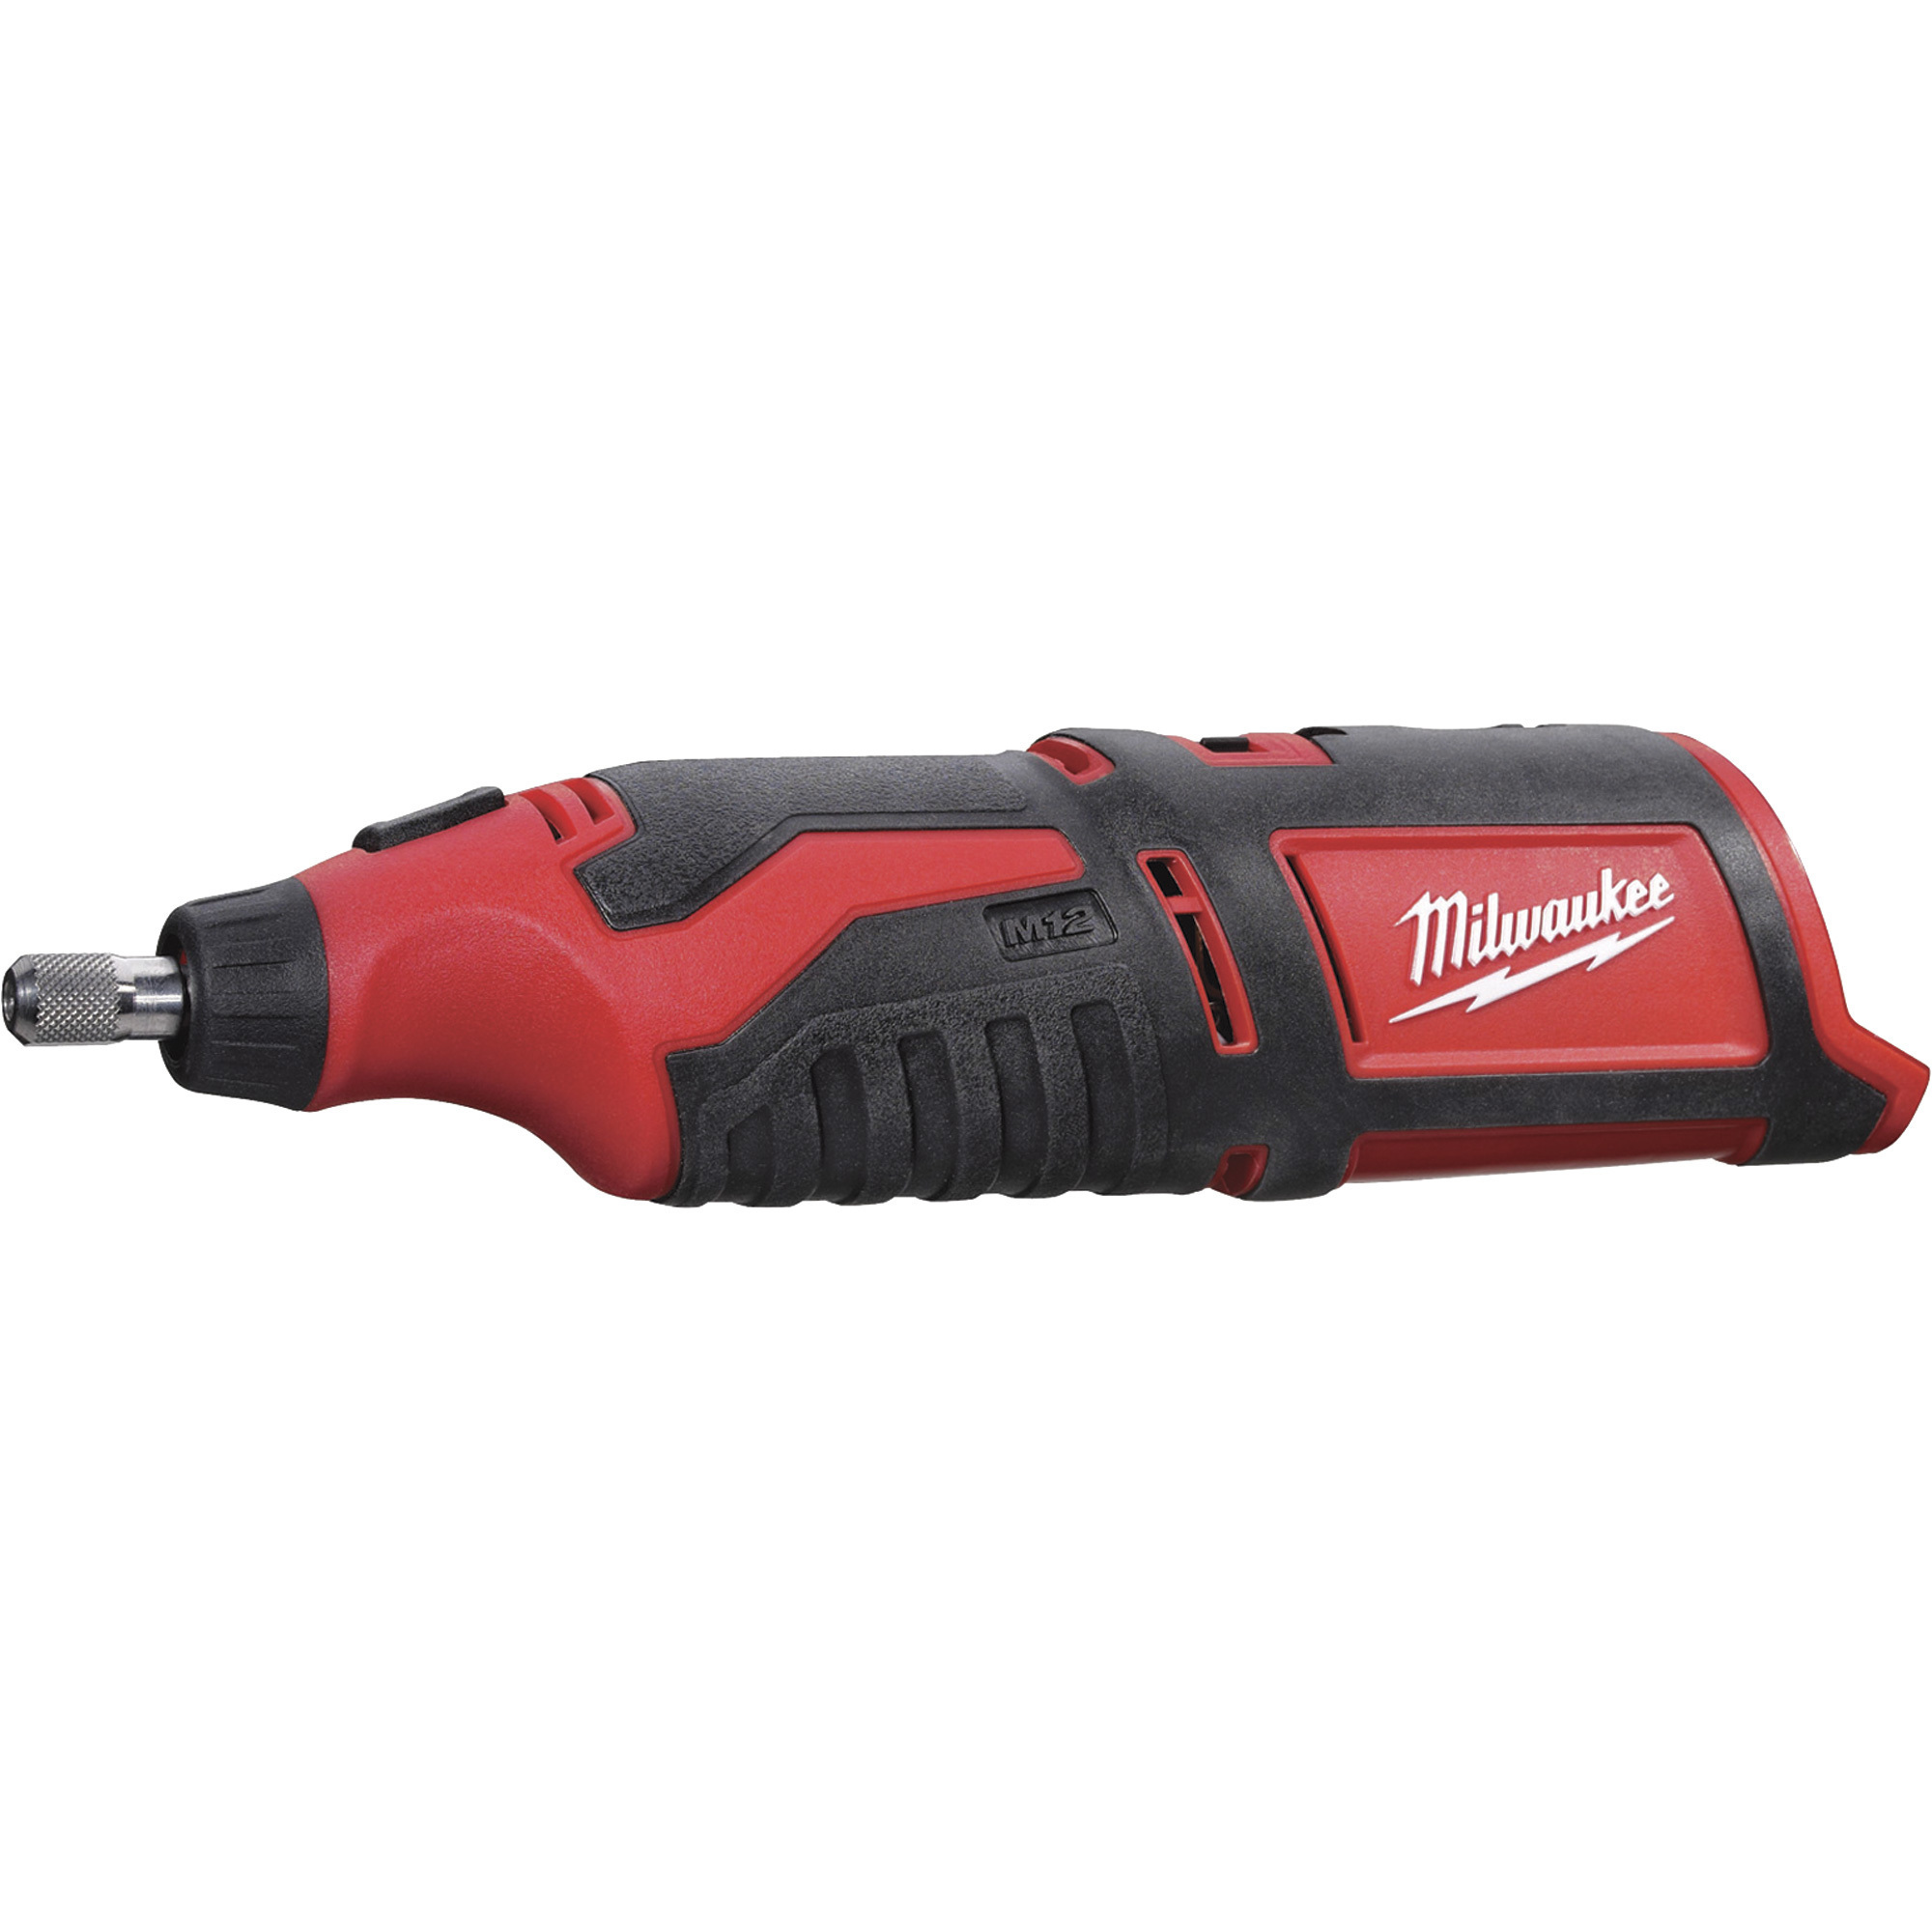 Milwaukee M12 12 Volt Cordless Rotary Multi-Tool, Tool Only, Model 2460-20